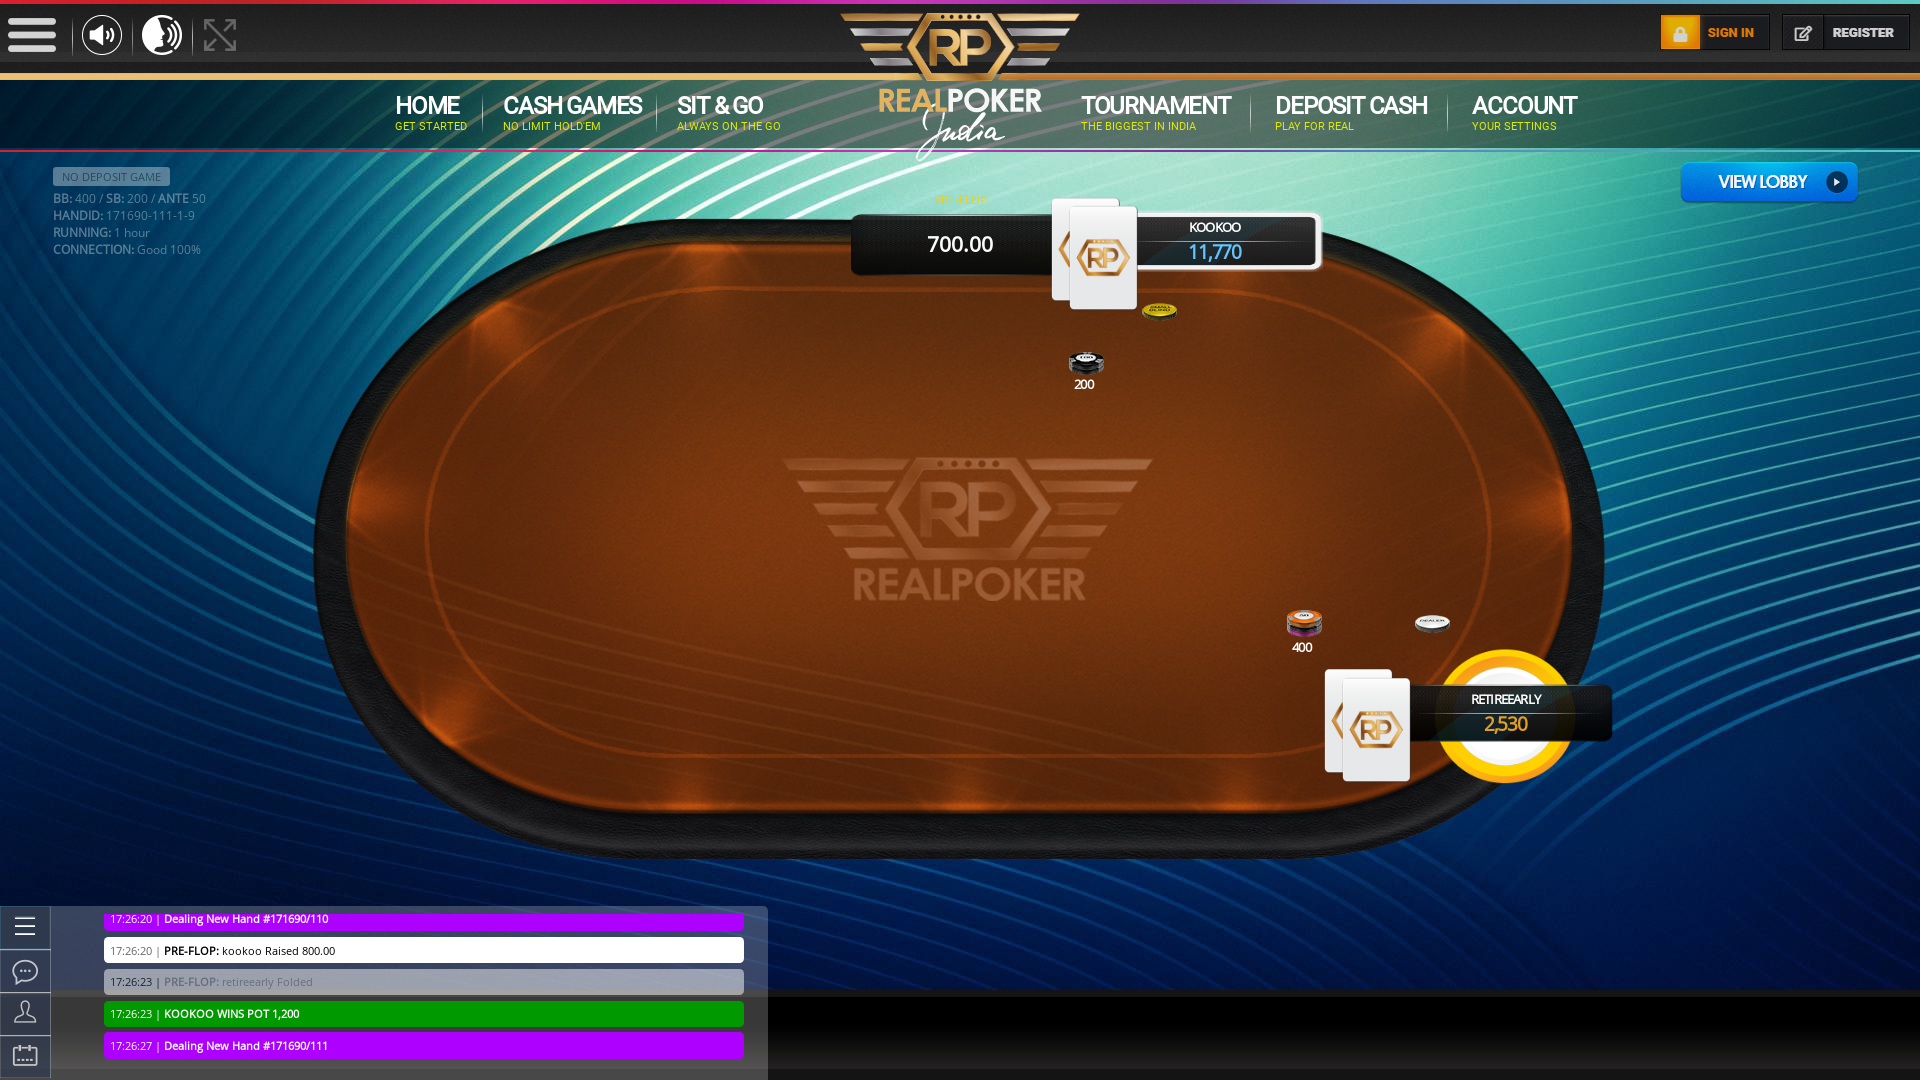 Real poker 10 player table in the 64th minute